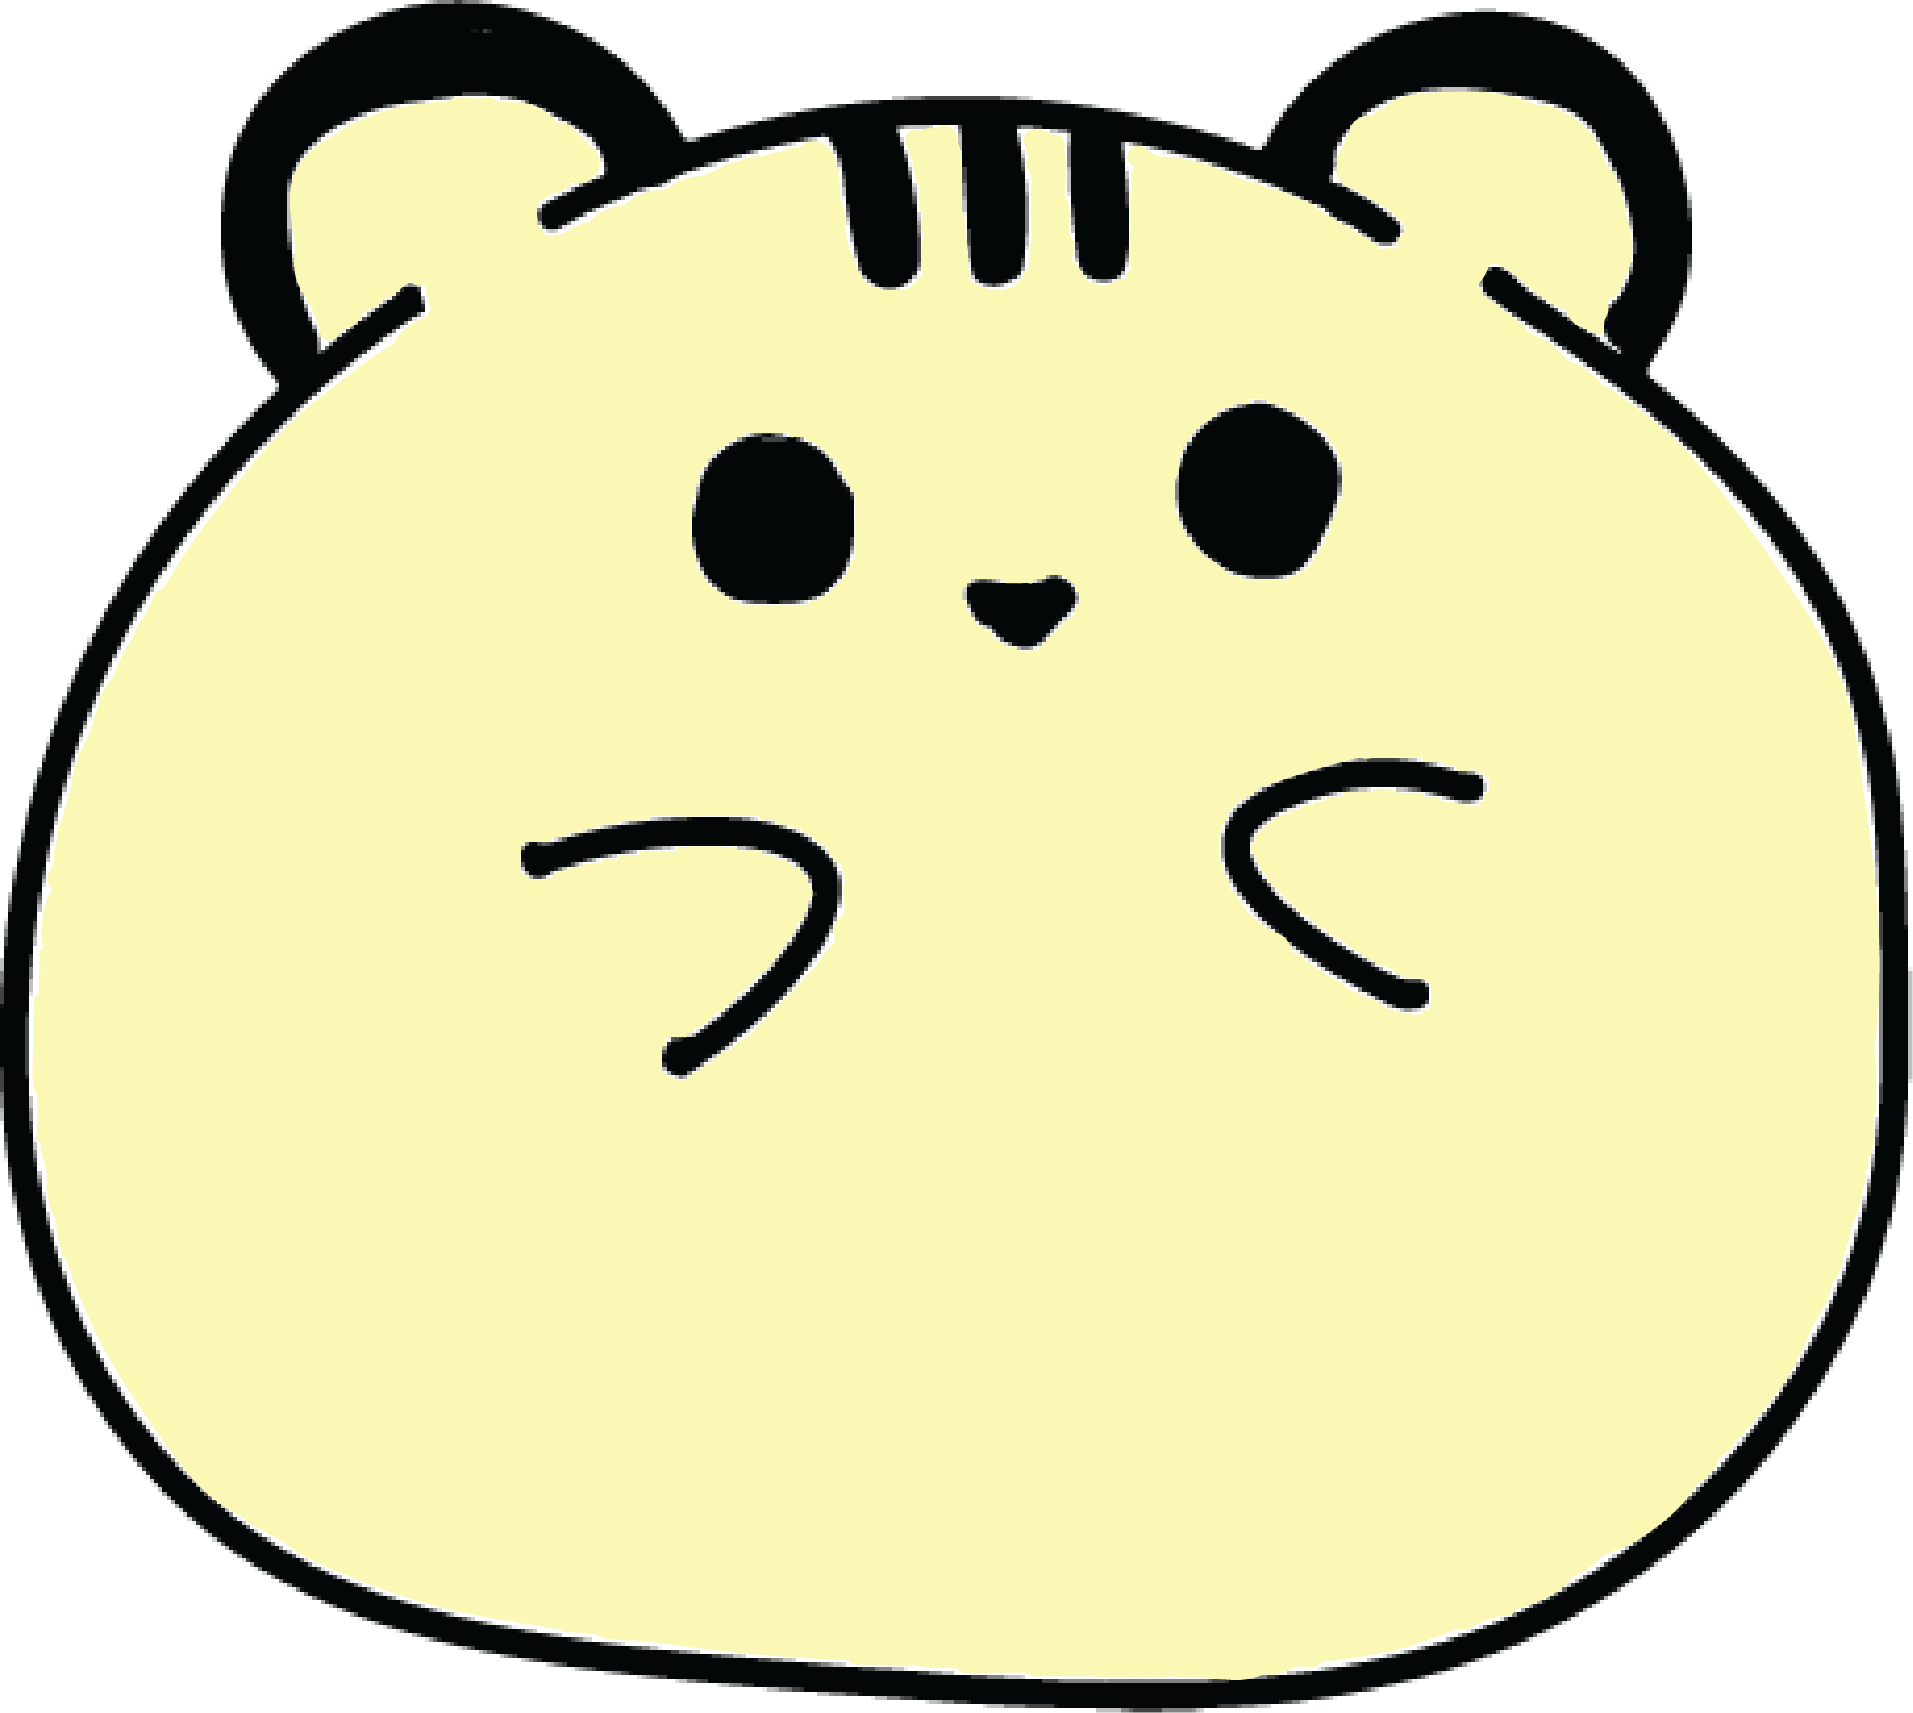 The logo of the Humble Hamster is a cute, round yellow hamster 